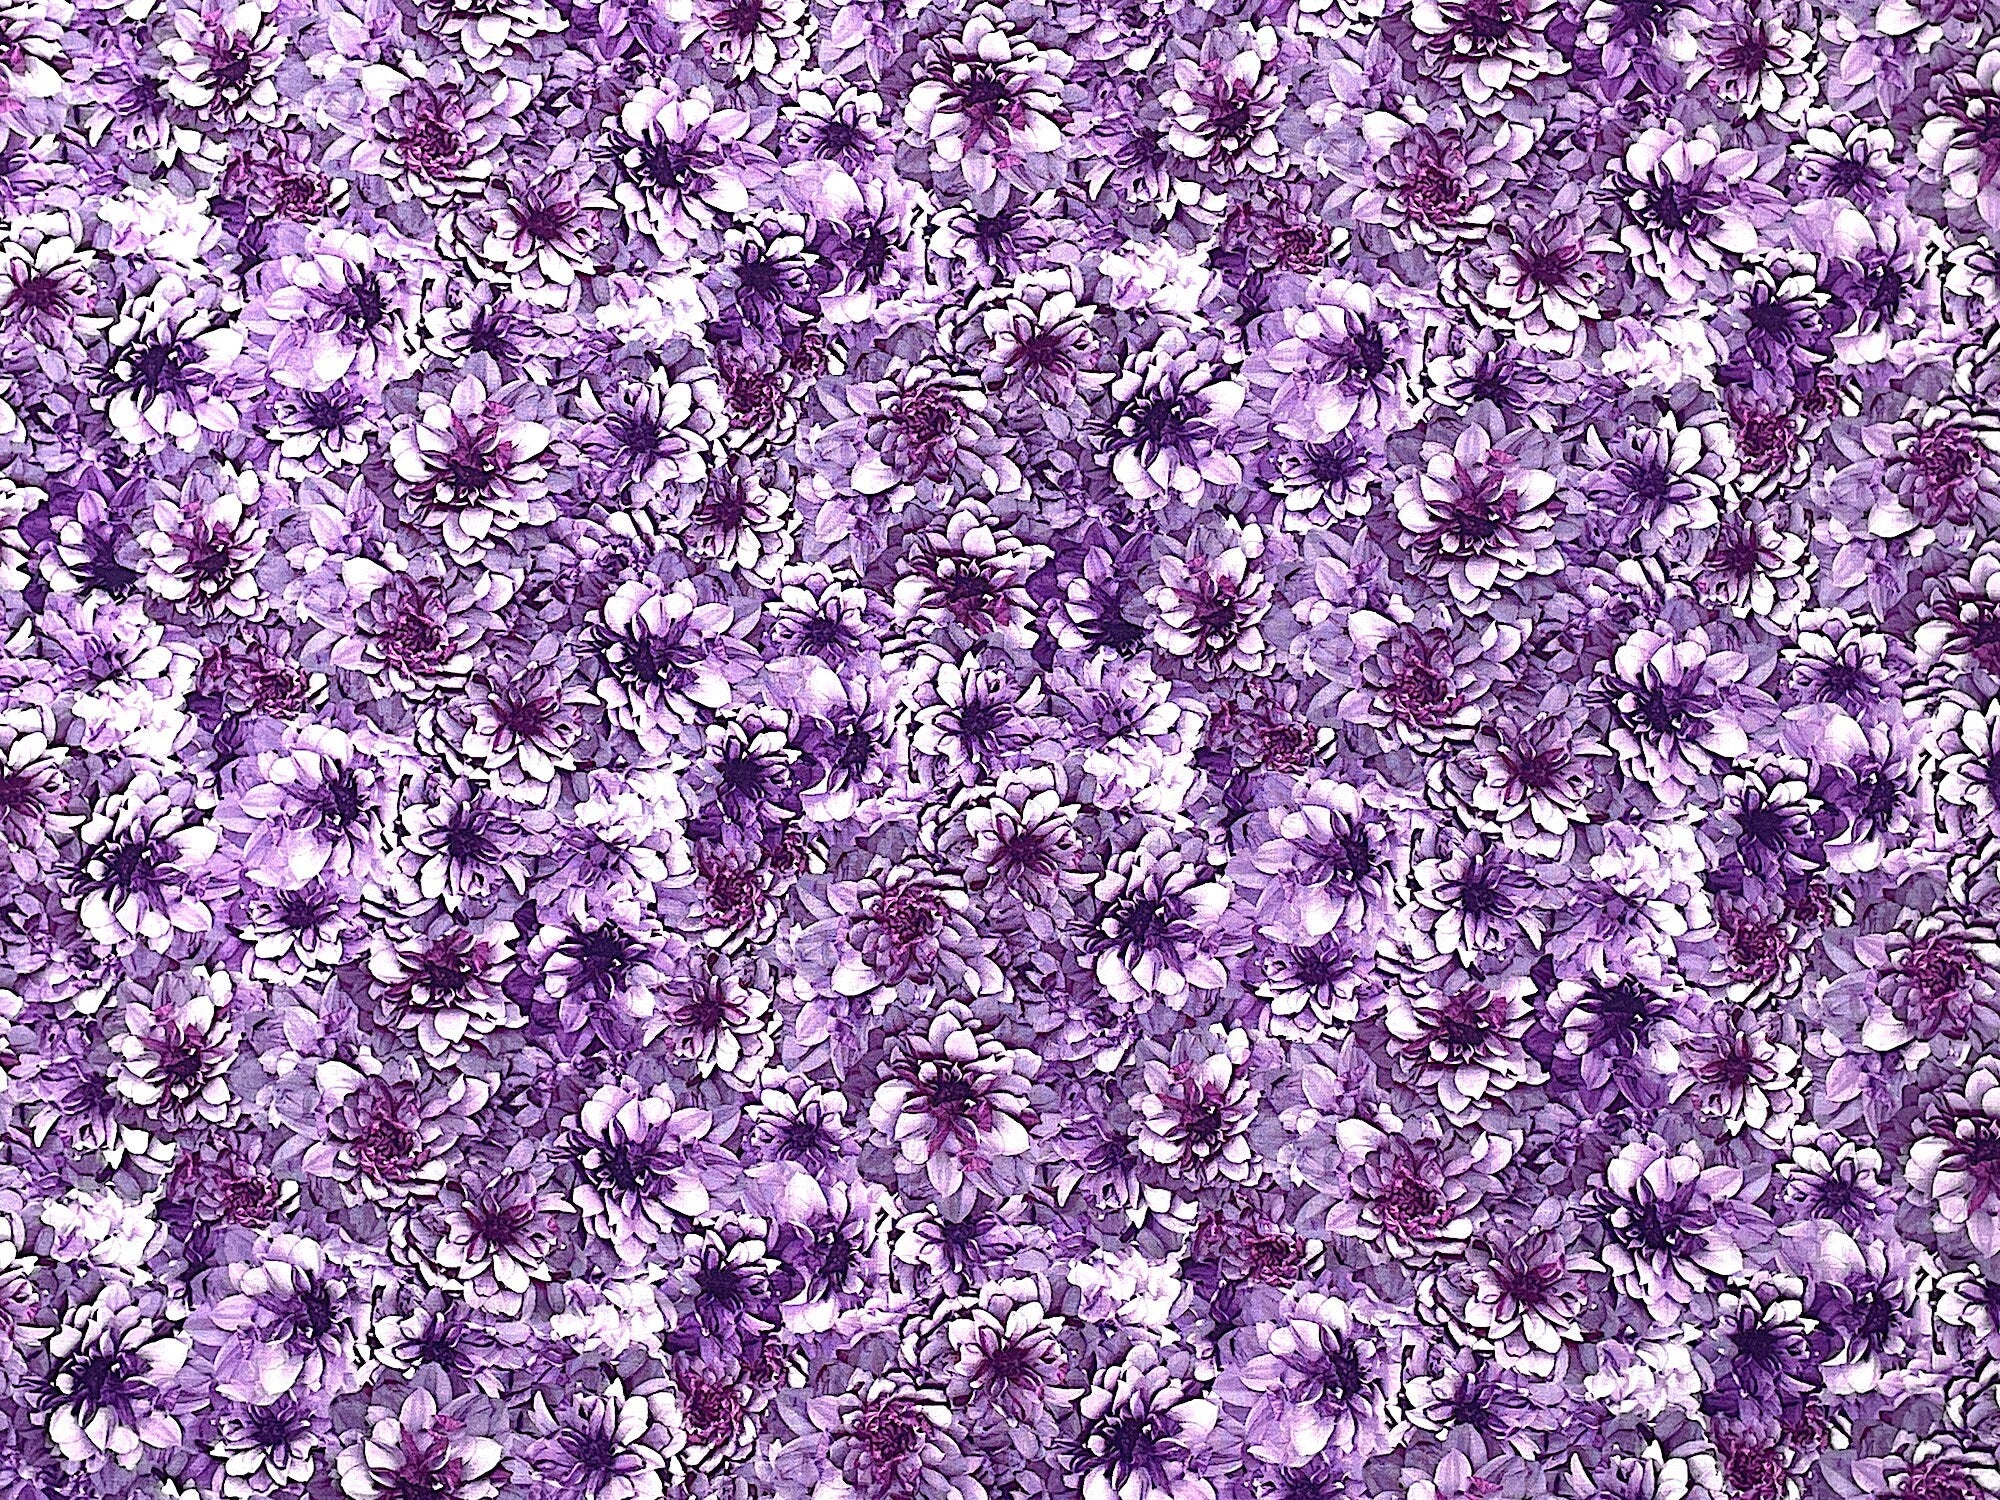 This Dahlia fabric is part of Tina's Garden collection by Tina Leto for Clothworks. This fabric is packed with dahlias in shades of purple and lavender